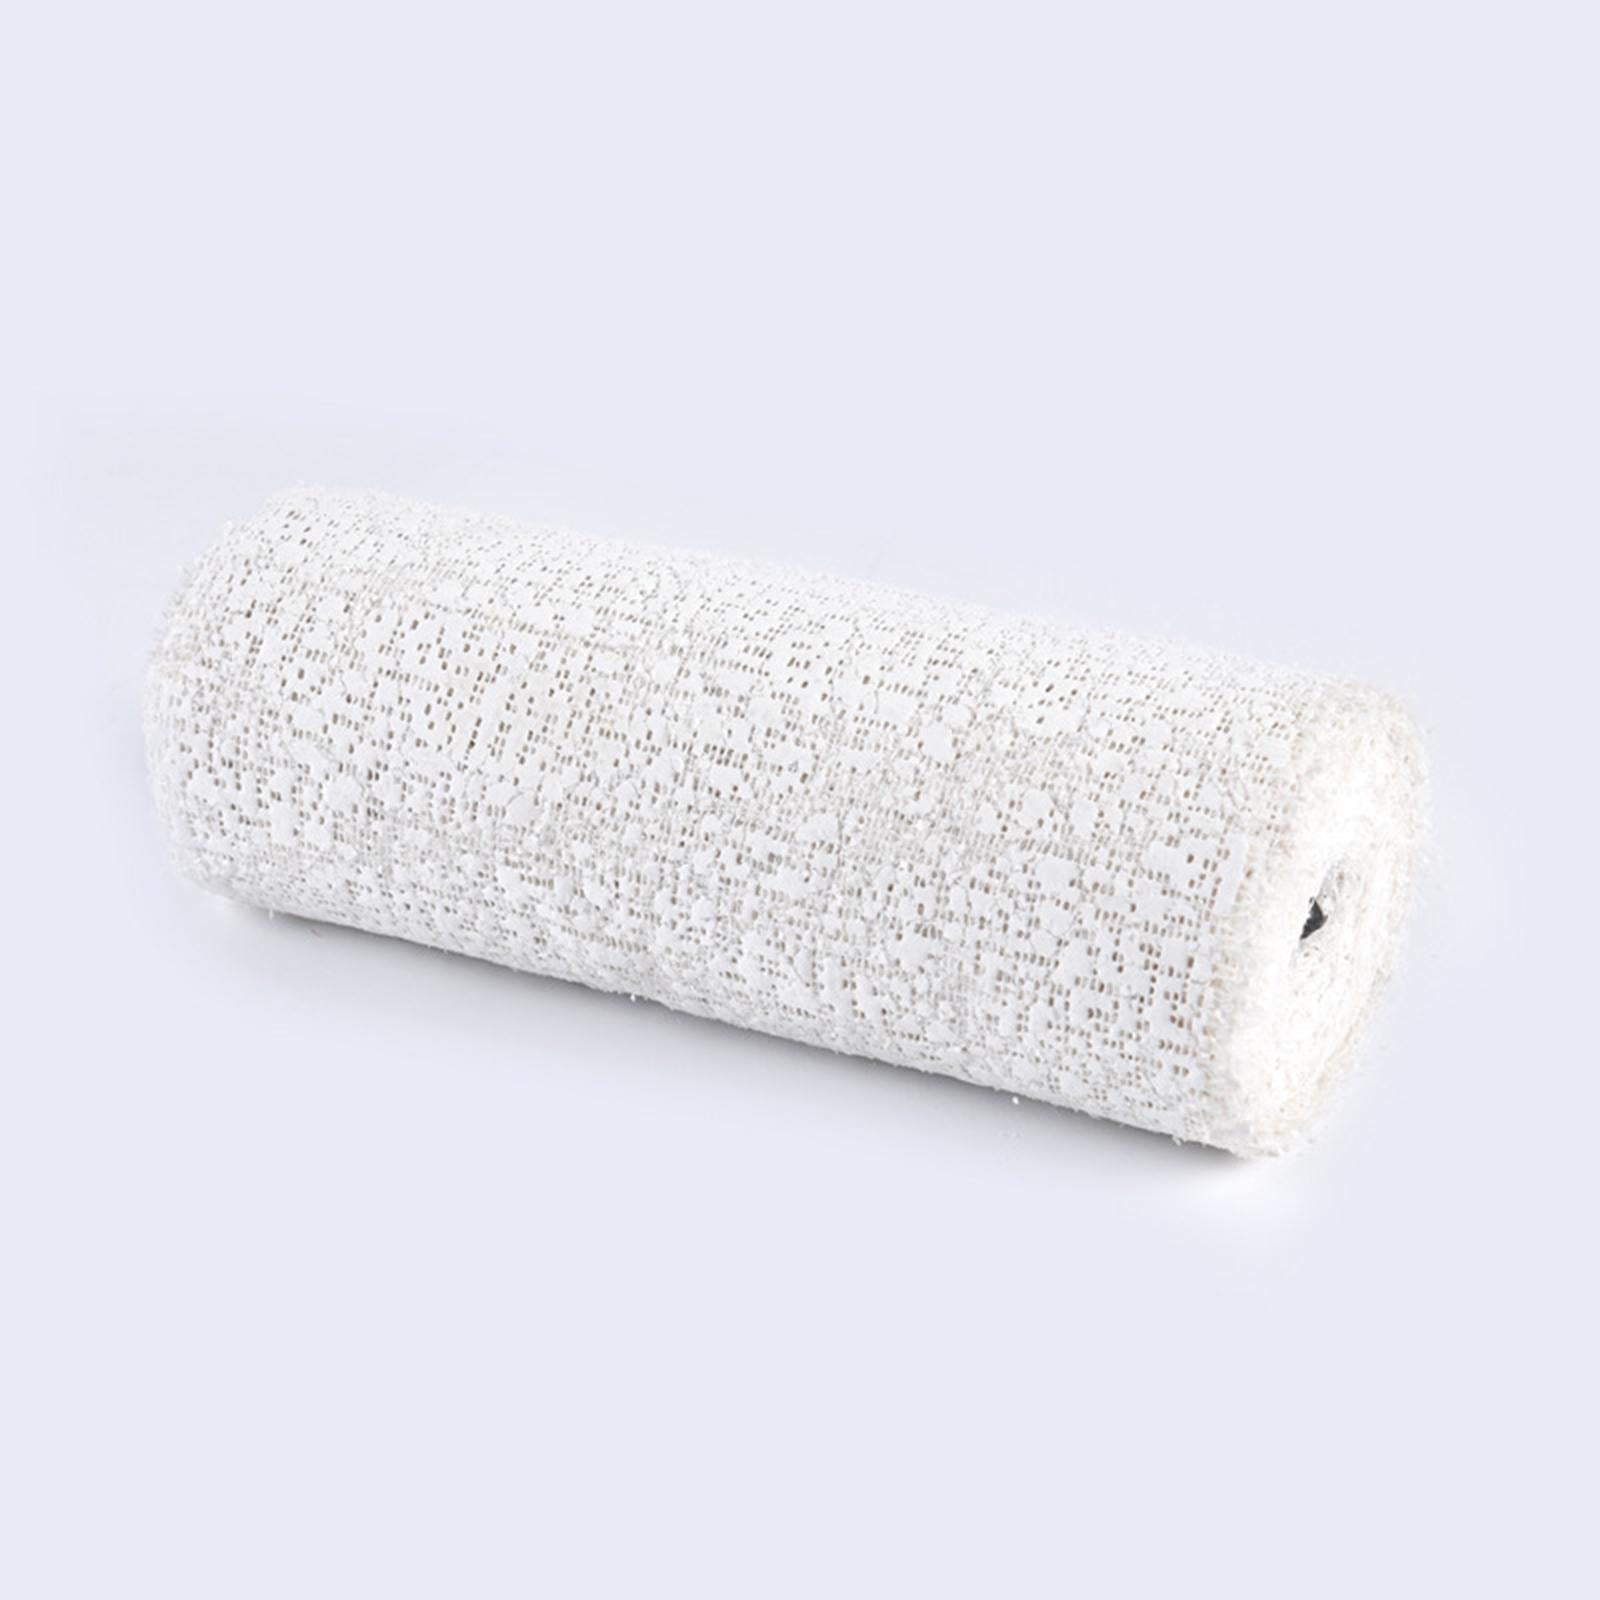 Craft Wrap Plaster Cloth Bandage for Hobby Craft Scenery Belly Cast - 4x180 (5yd) Gauze Roll (8 Pack)